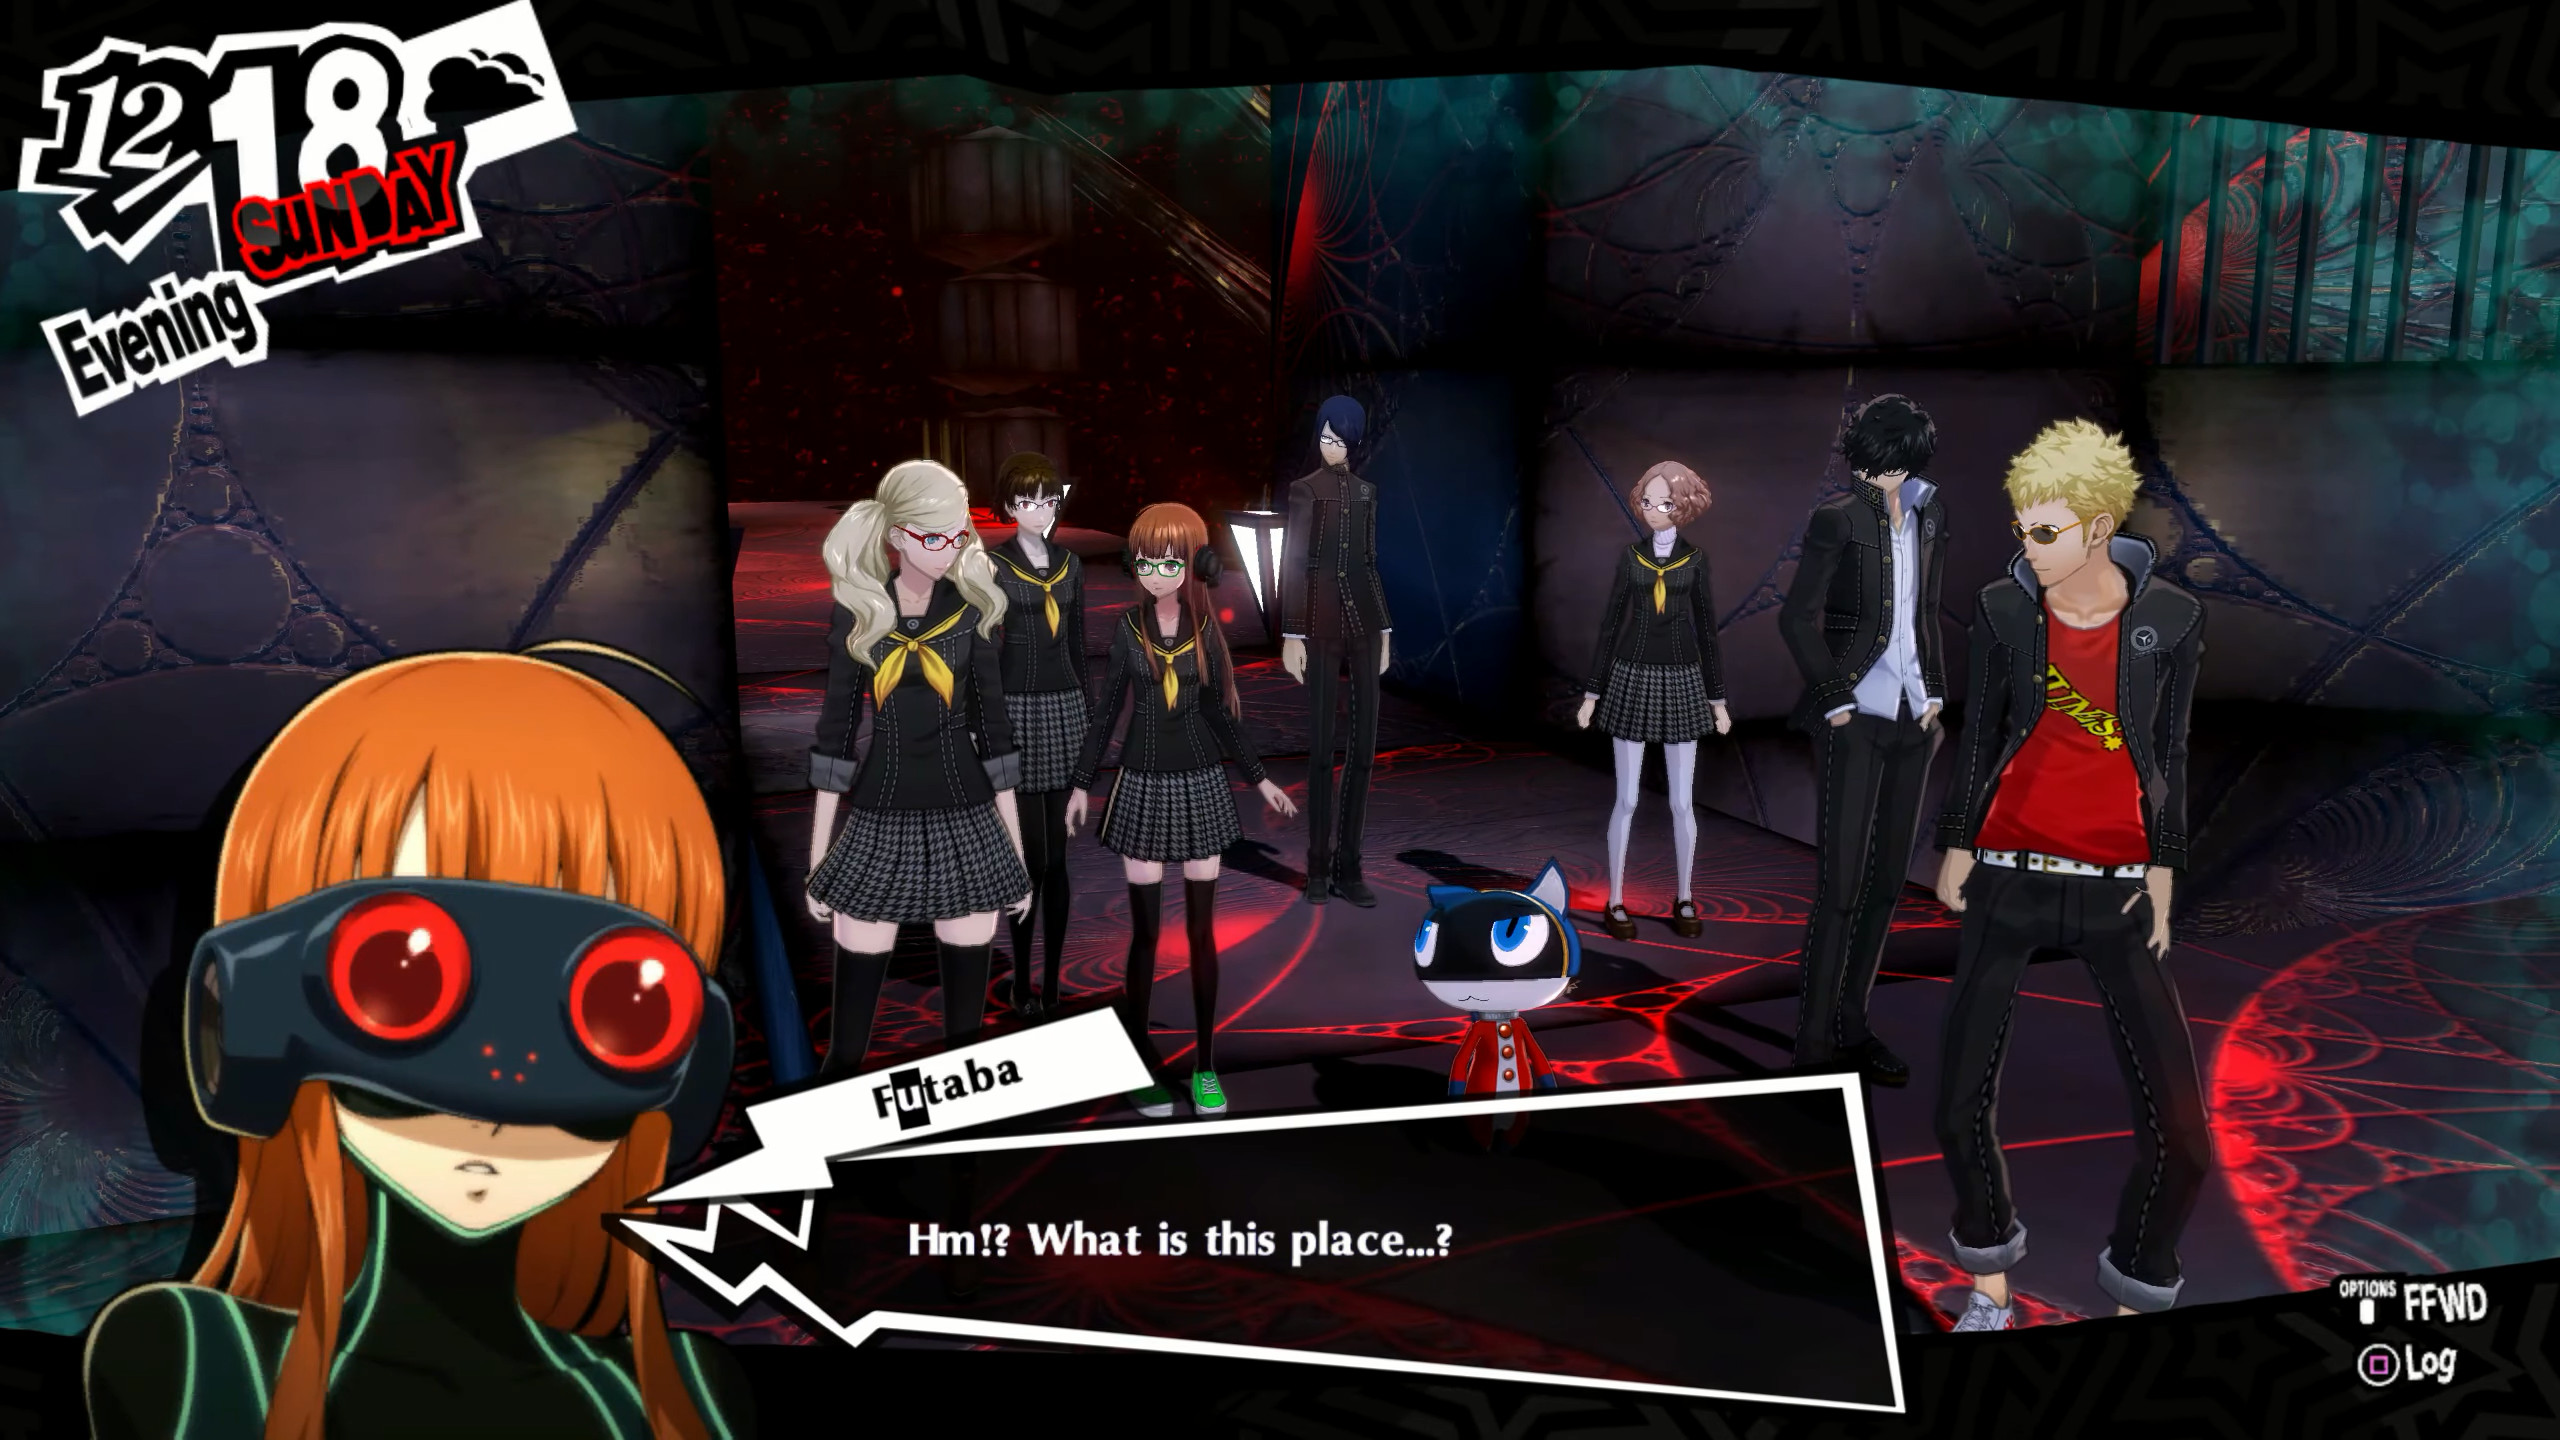 Turning Persona 5 Royal into Persona 4 With Mods 